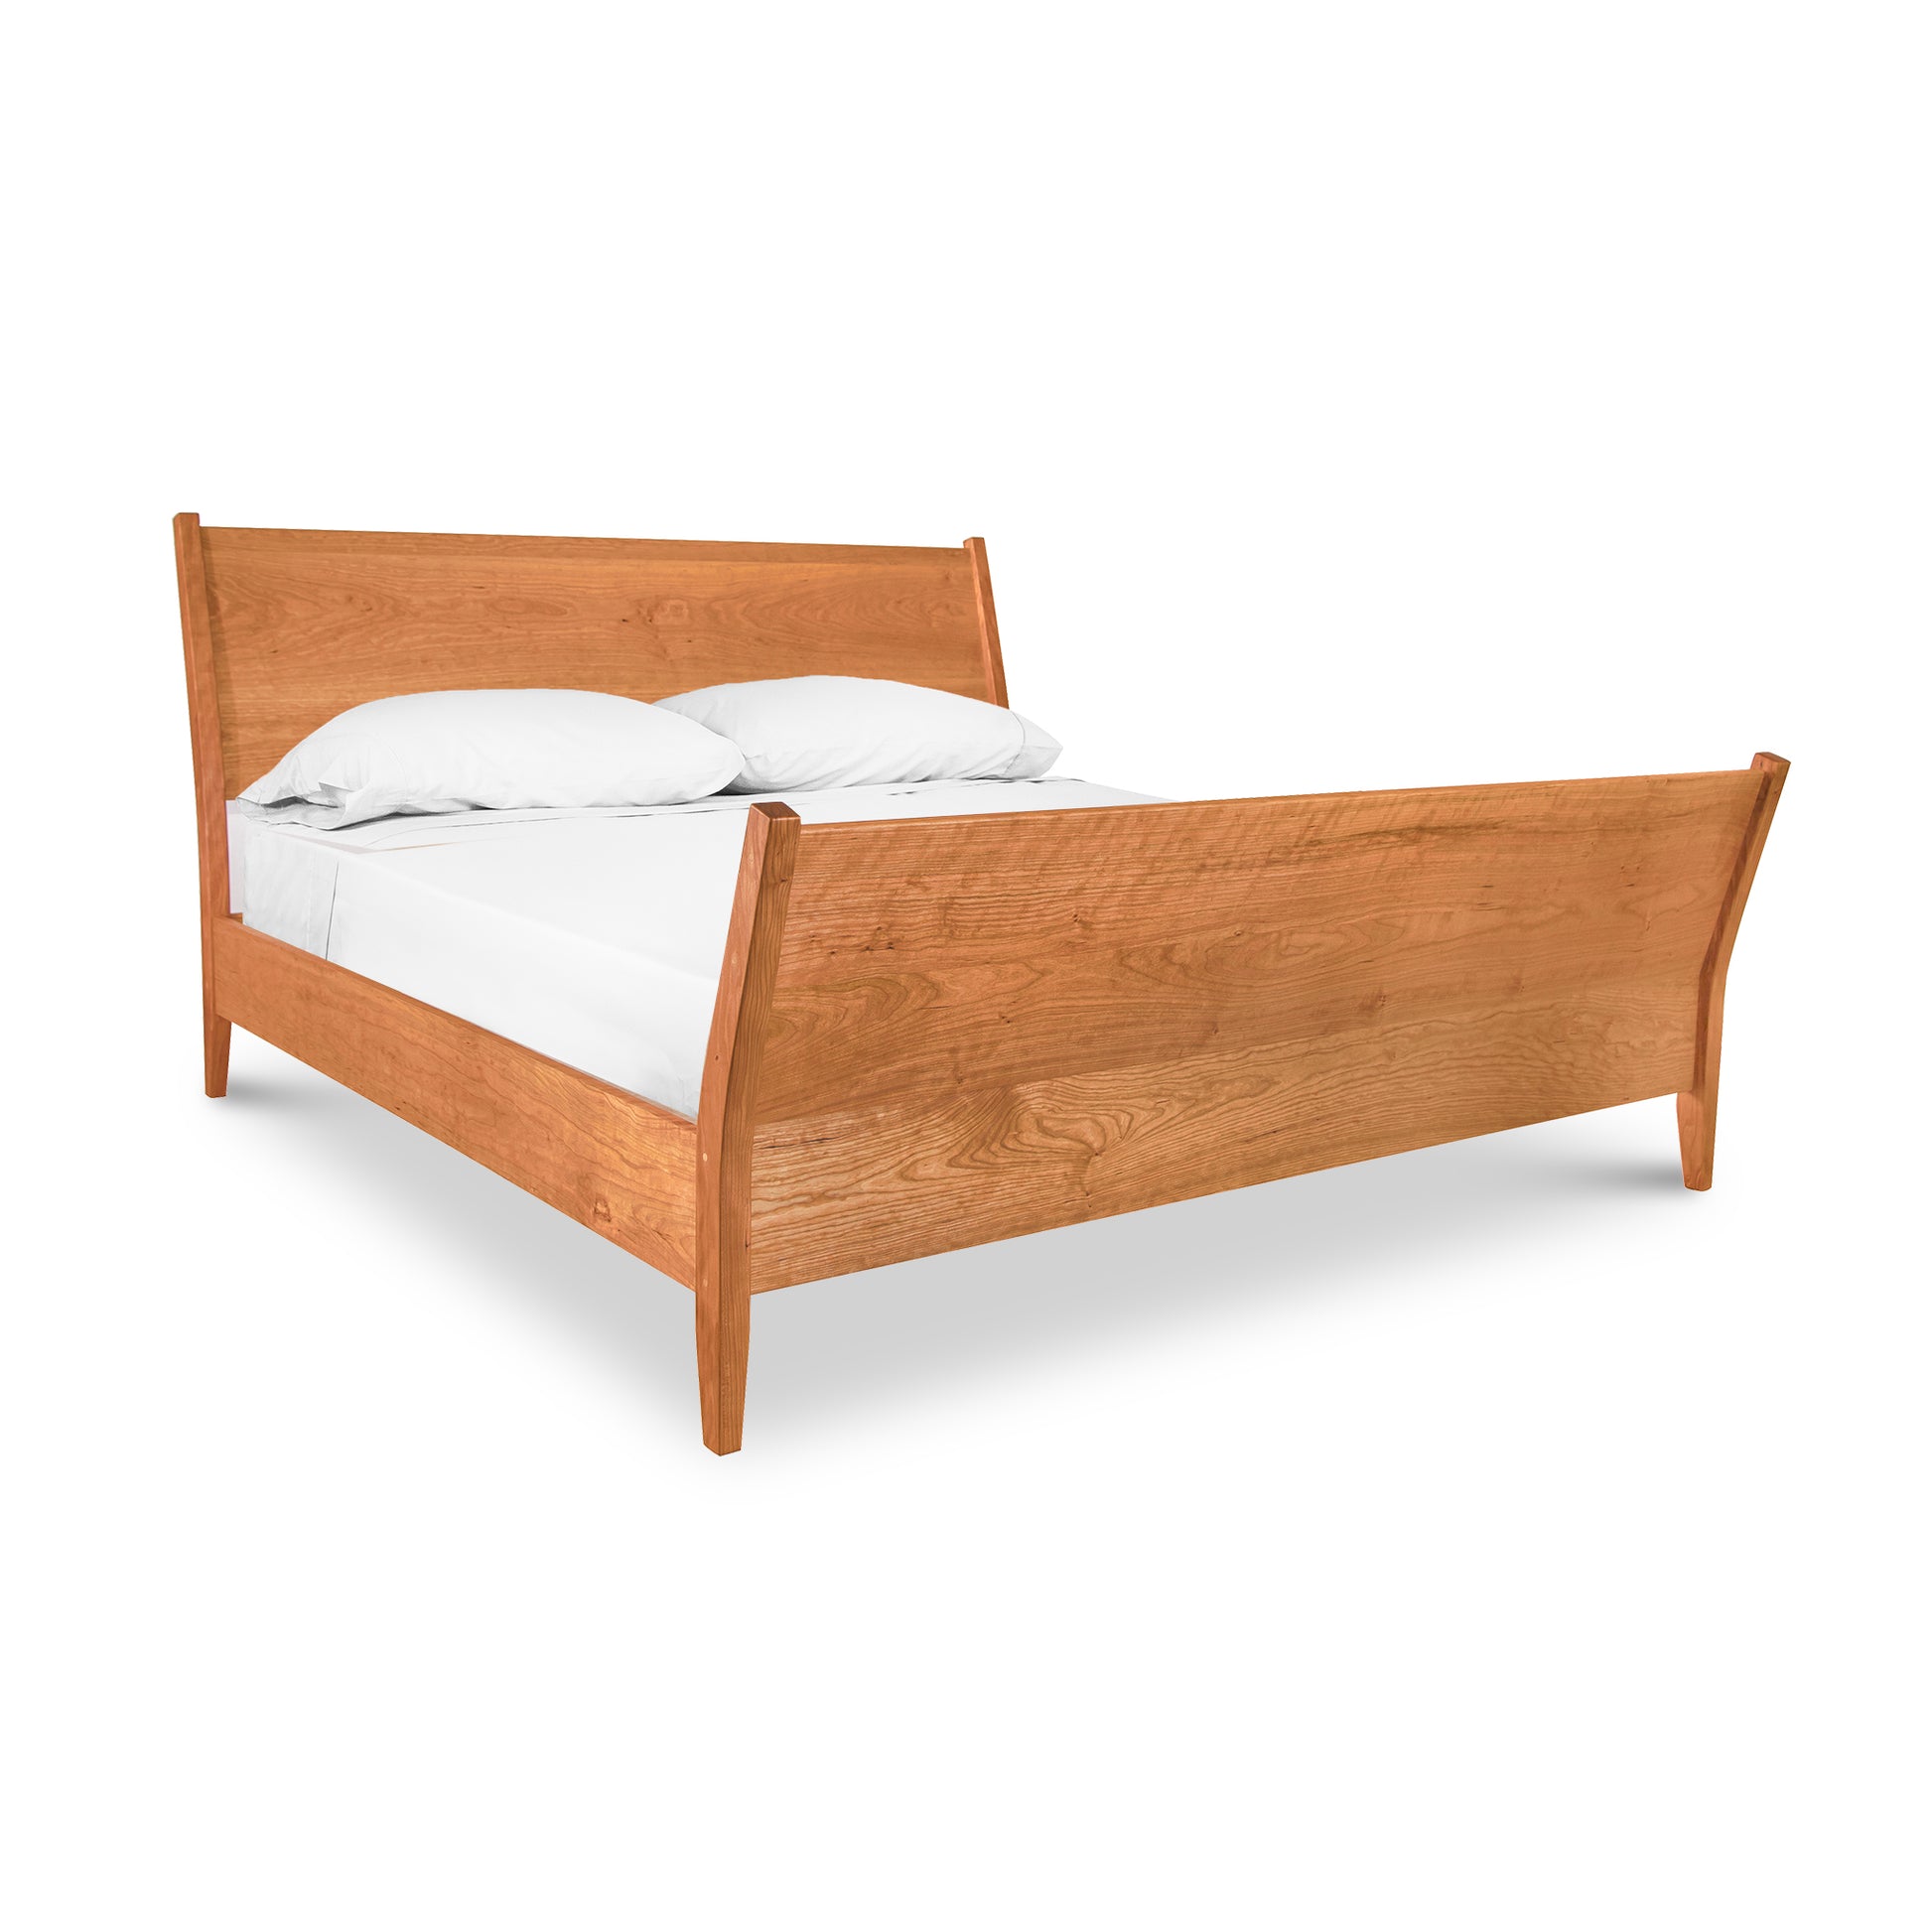 A Maple Corner Woodworks Andover Modern Incline Sleigh Bed with a curved headboard and footboard, featuring a white mattress and two pillows, isolated on a white background.